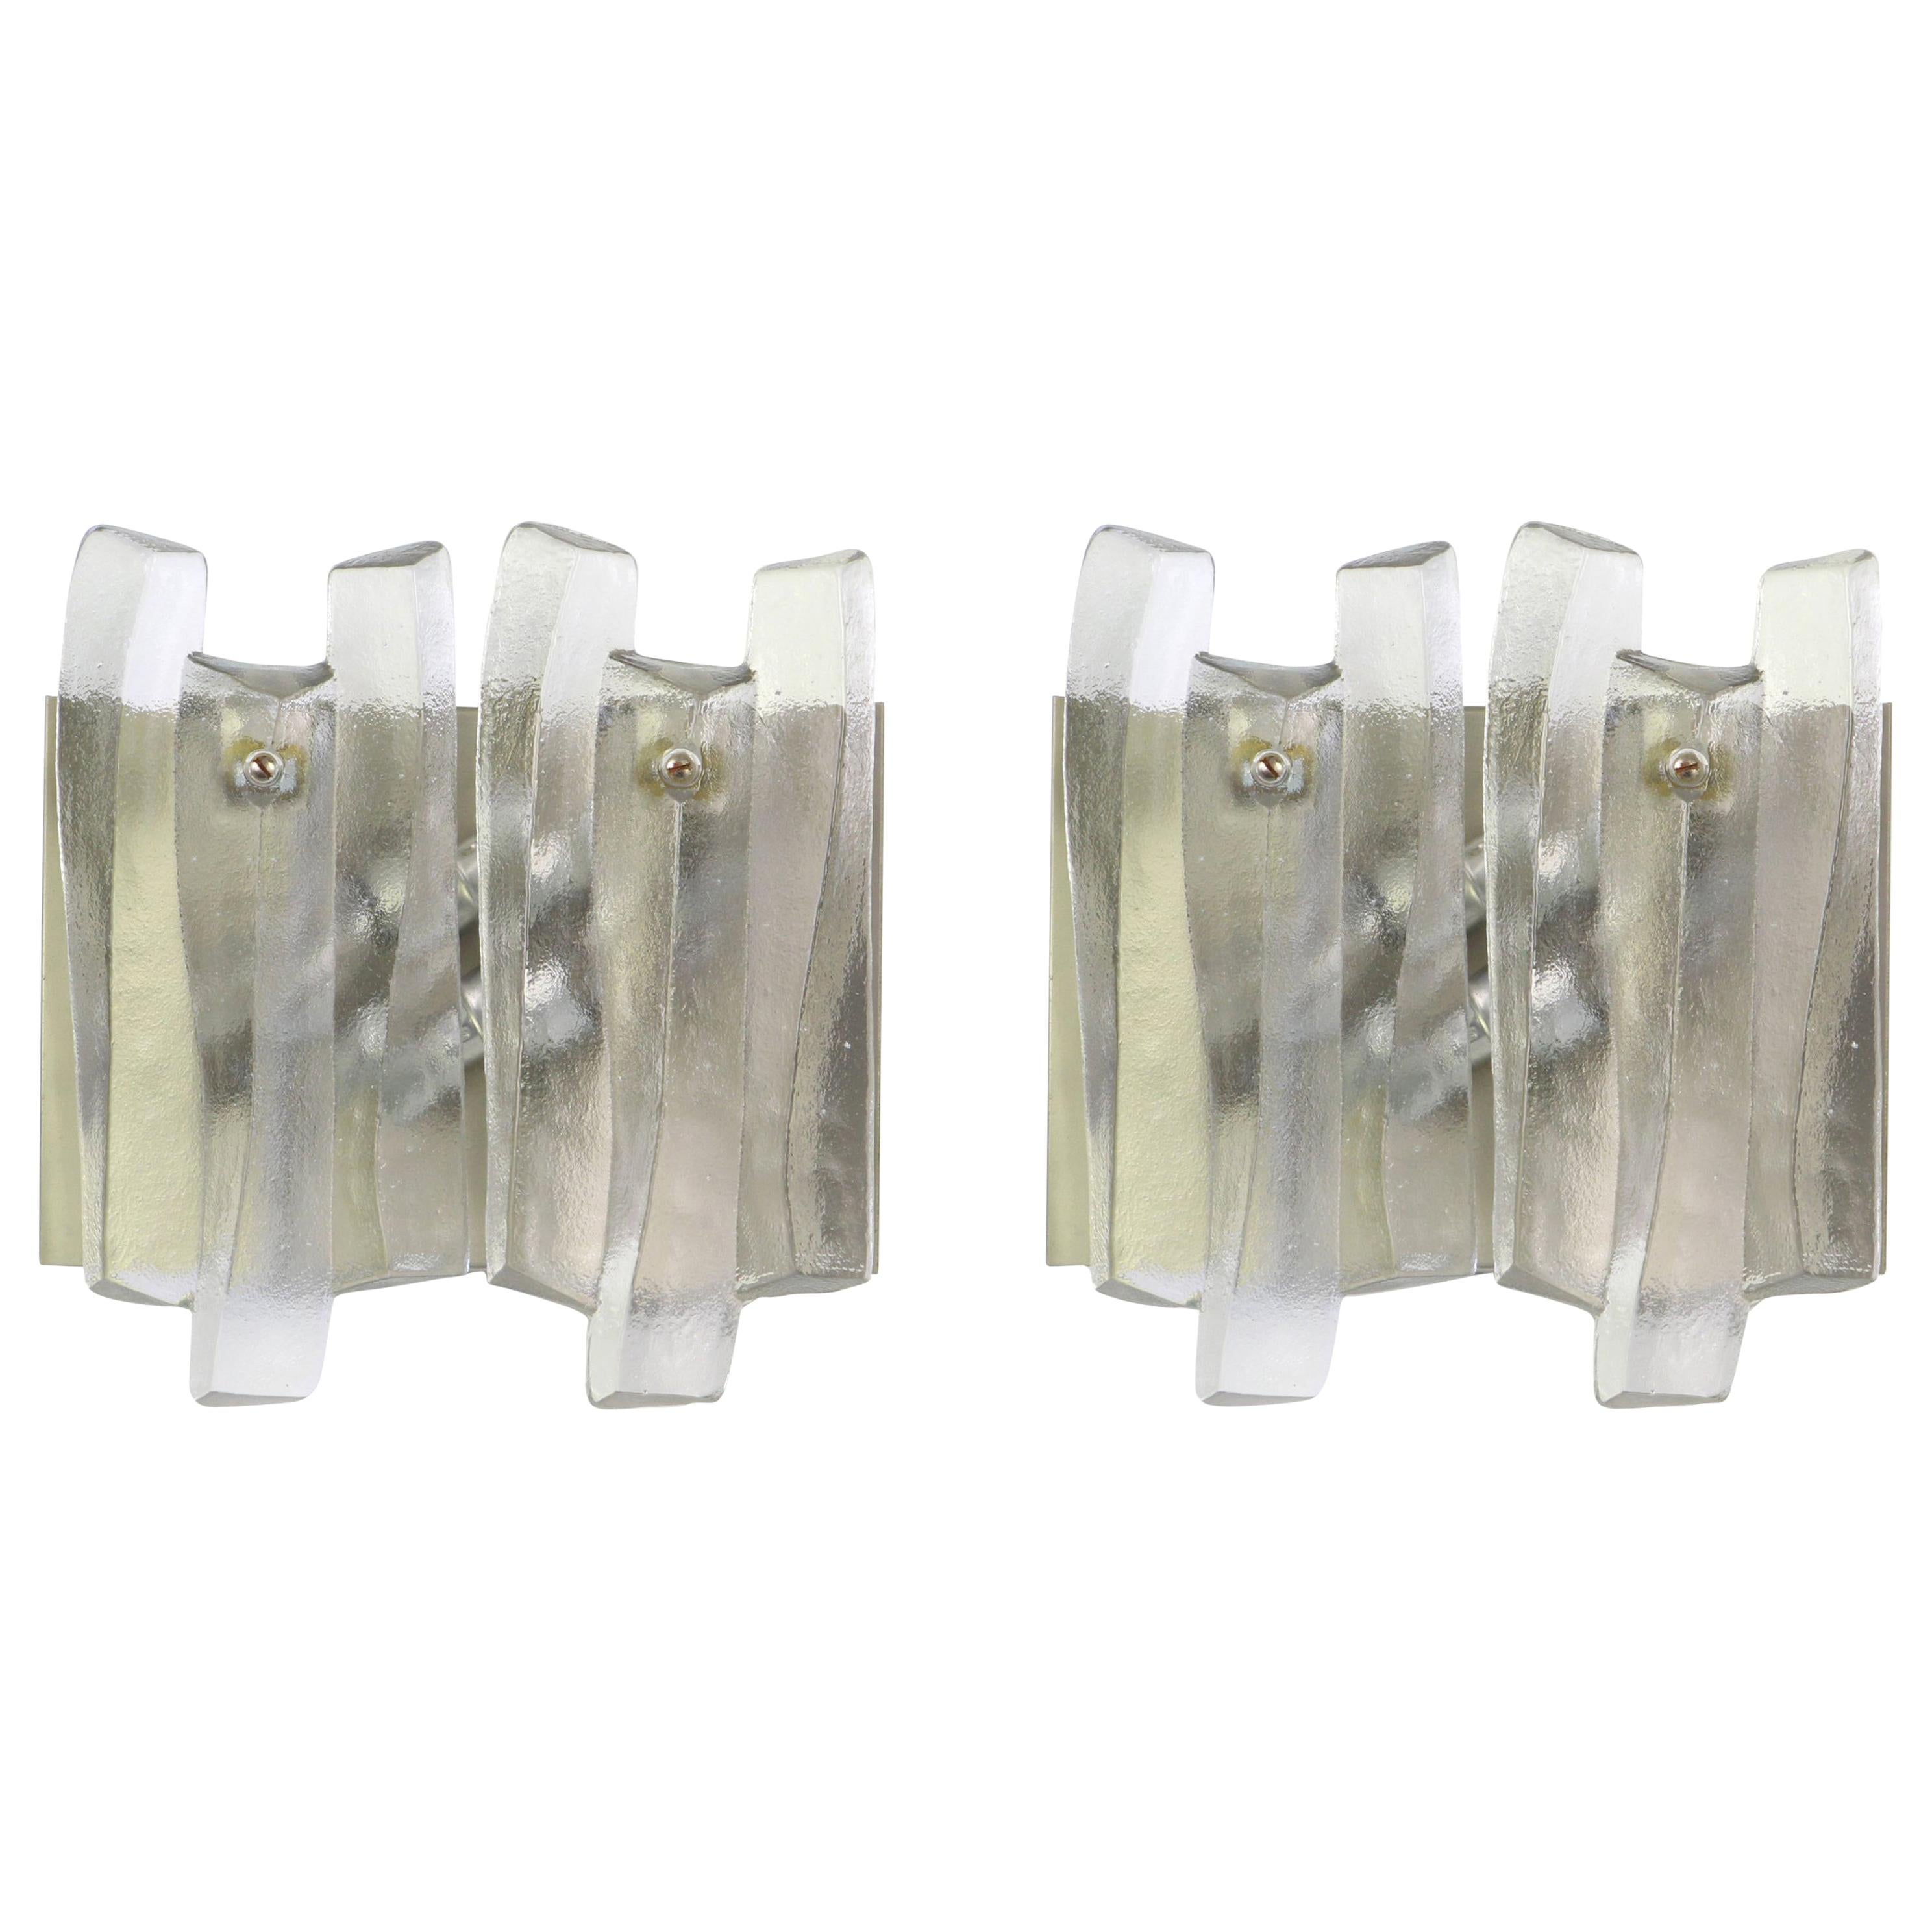 Pair of Large Murano Glass Sconces by Kalmar 'Fuente', Austria, 1960s For Sale